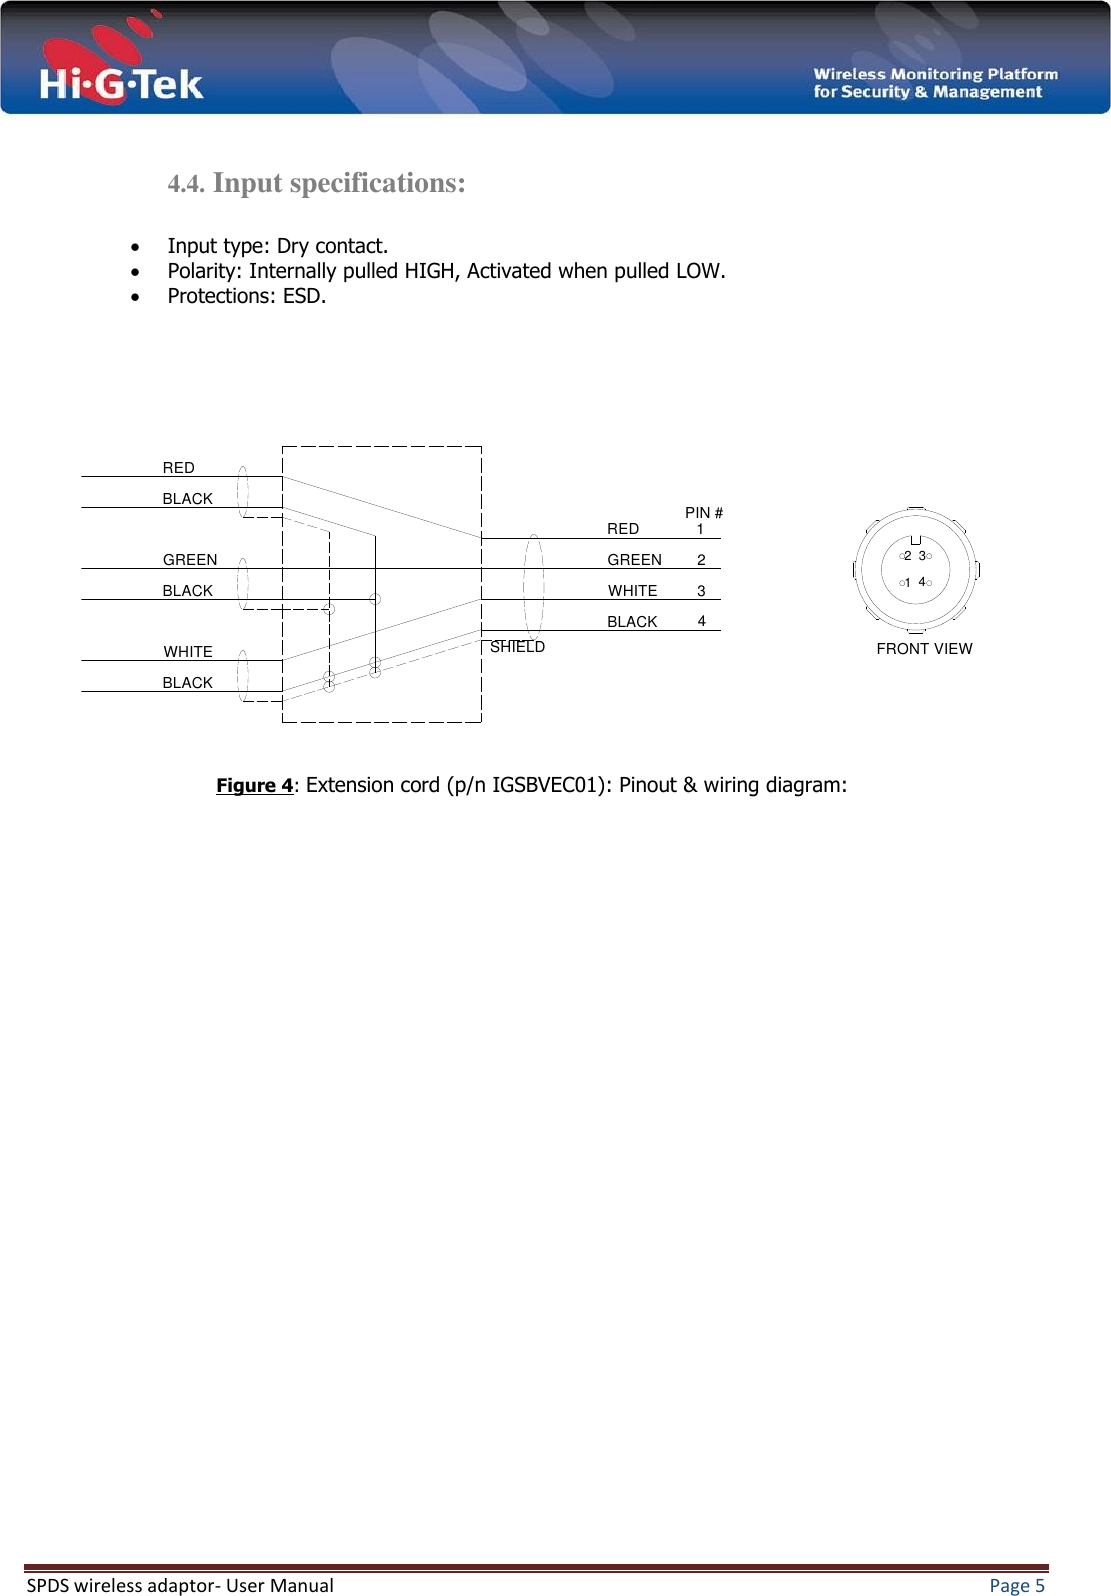  SPDS wireless adaptor- User Manual  Page 5   4.4. Input specifications:   Input type: Dry contact.  Polarity: Internally pulled HIGH, Activated when pulled LOW.  Protections: ESD.                                 4321FRONT VIEWPIN #4321BLACKREDGREENWHITEBLACKREDBLACKBLACKGREENWHITE SHIELDFigure 4: Extension cord (p/n IGSBVEC01): Pinout &amp; wiring diagram:  